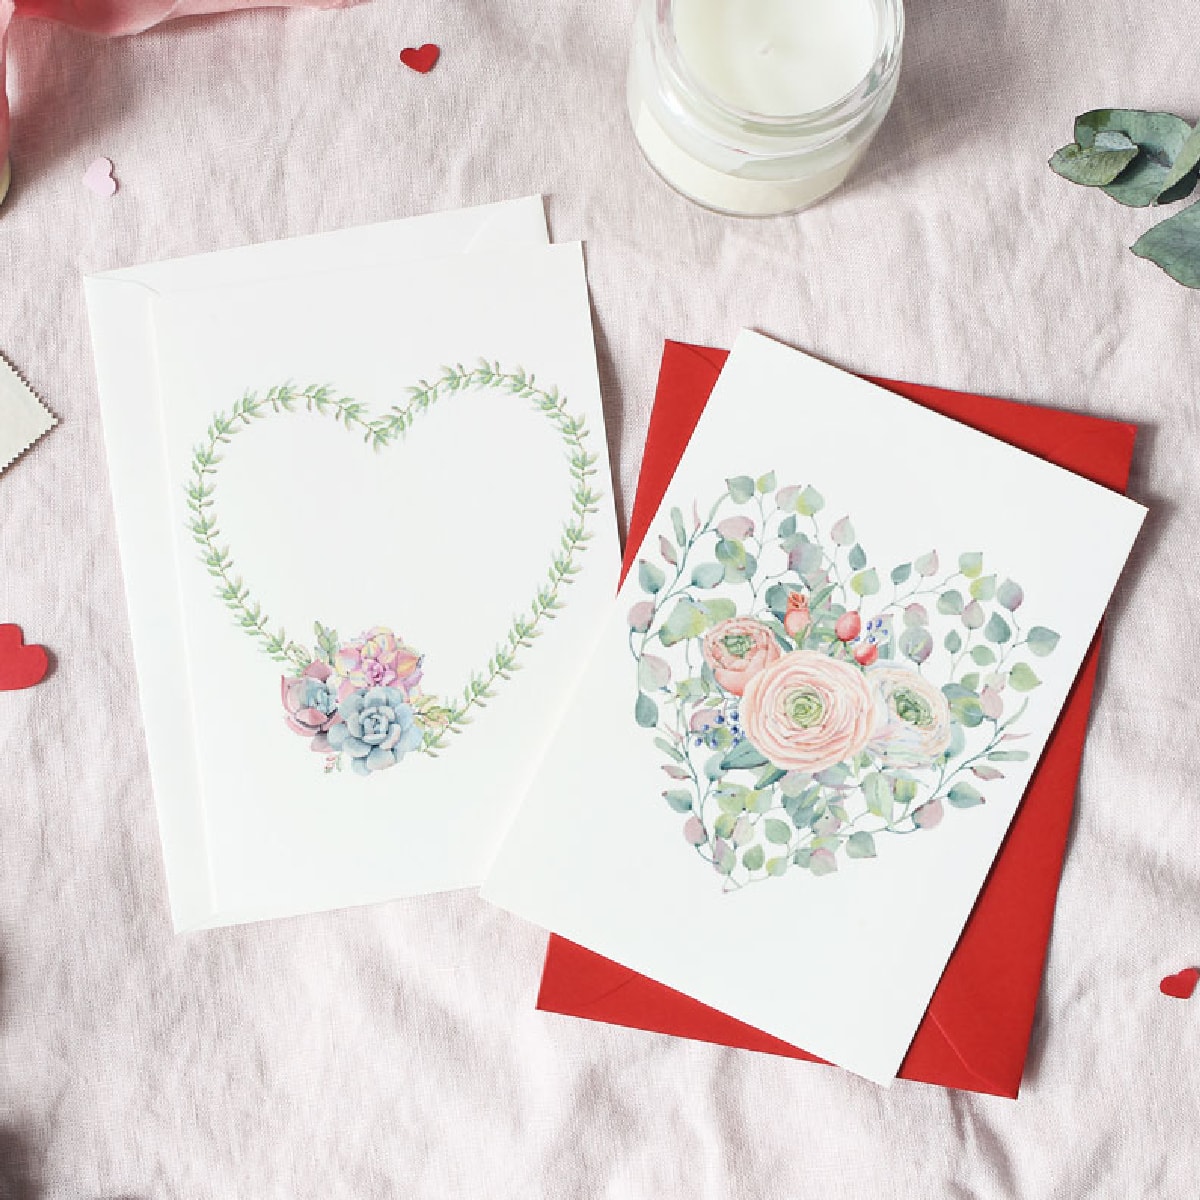 5 Free Watercolor Valentine Heart Cards